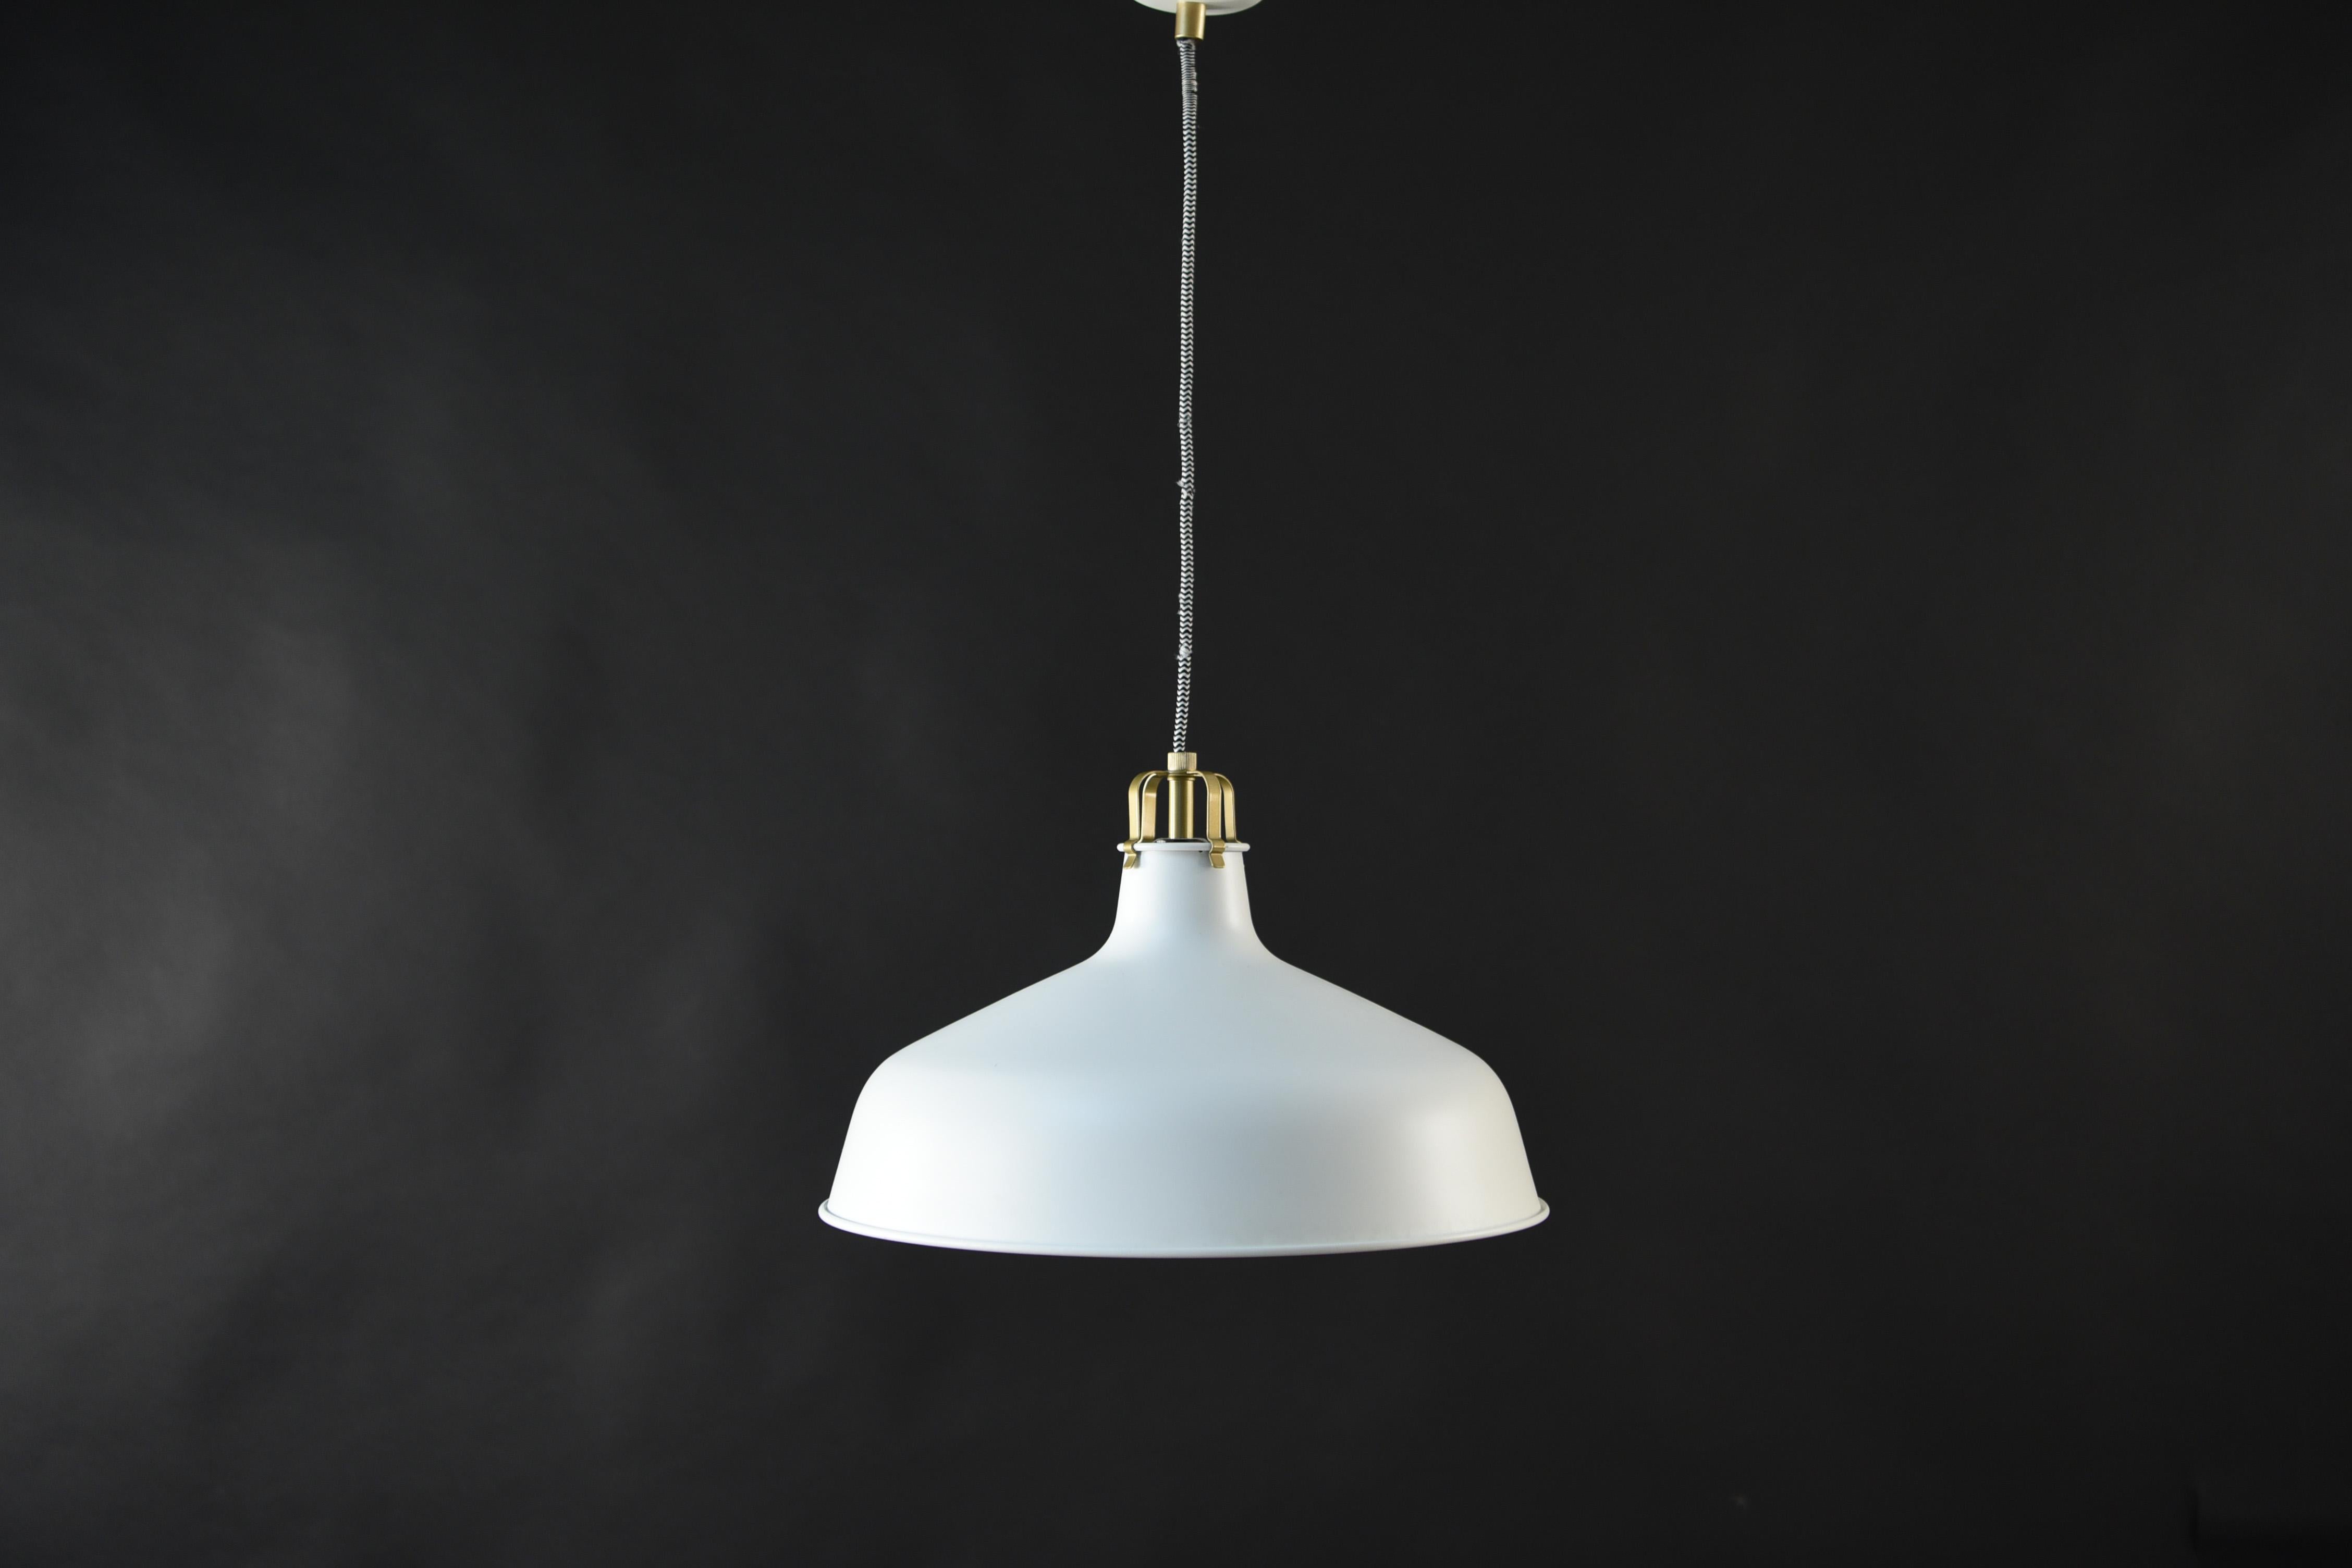 This Swedish midcentury pendant light is a simple, Classic form that can be used in virtually any interior. The white surface allows the light to be reflected outwards.